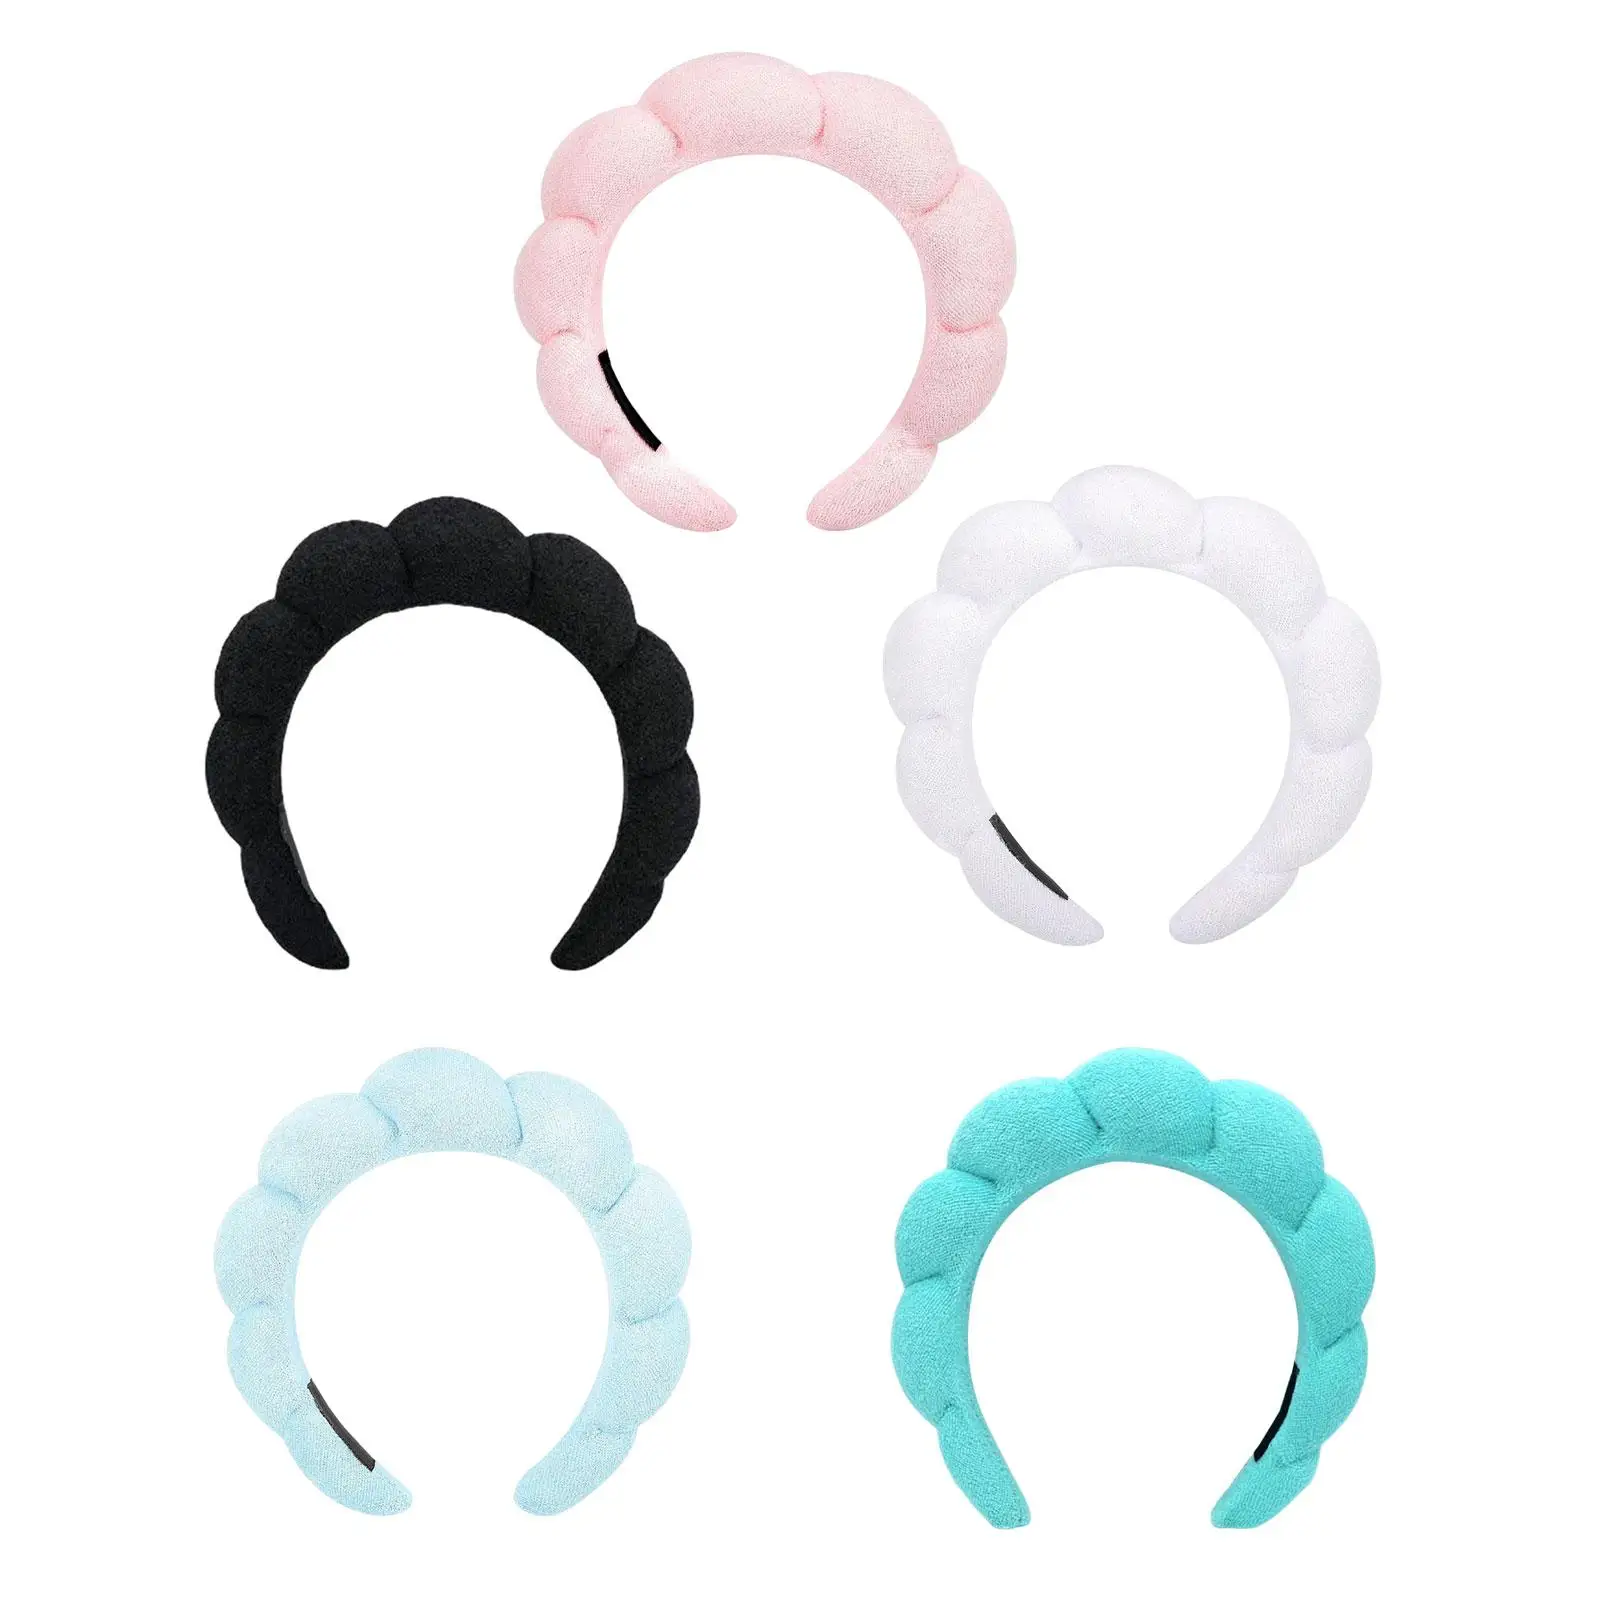 makeup Sponge Headband Thick Water Absorbent for Shower Facial Cleansing